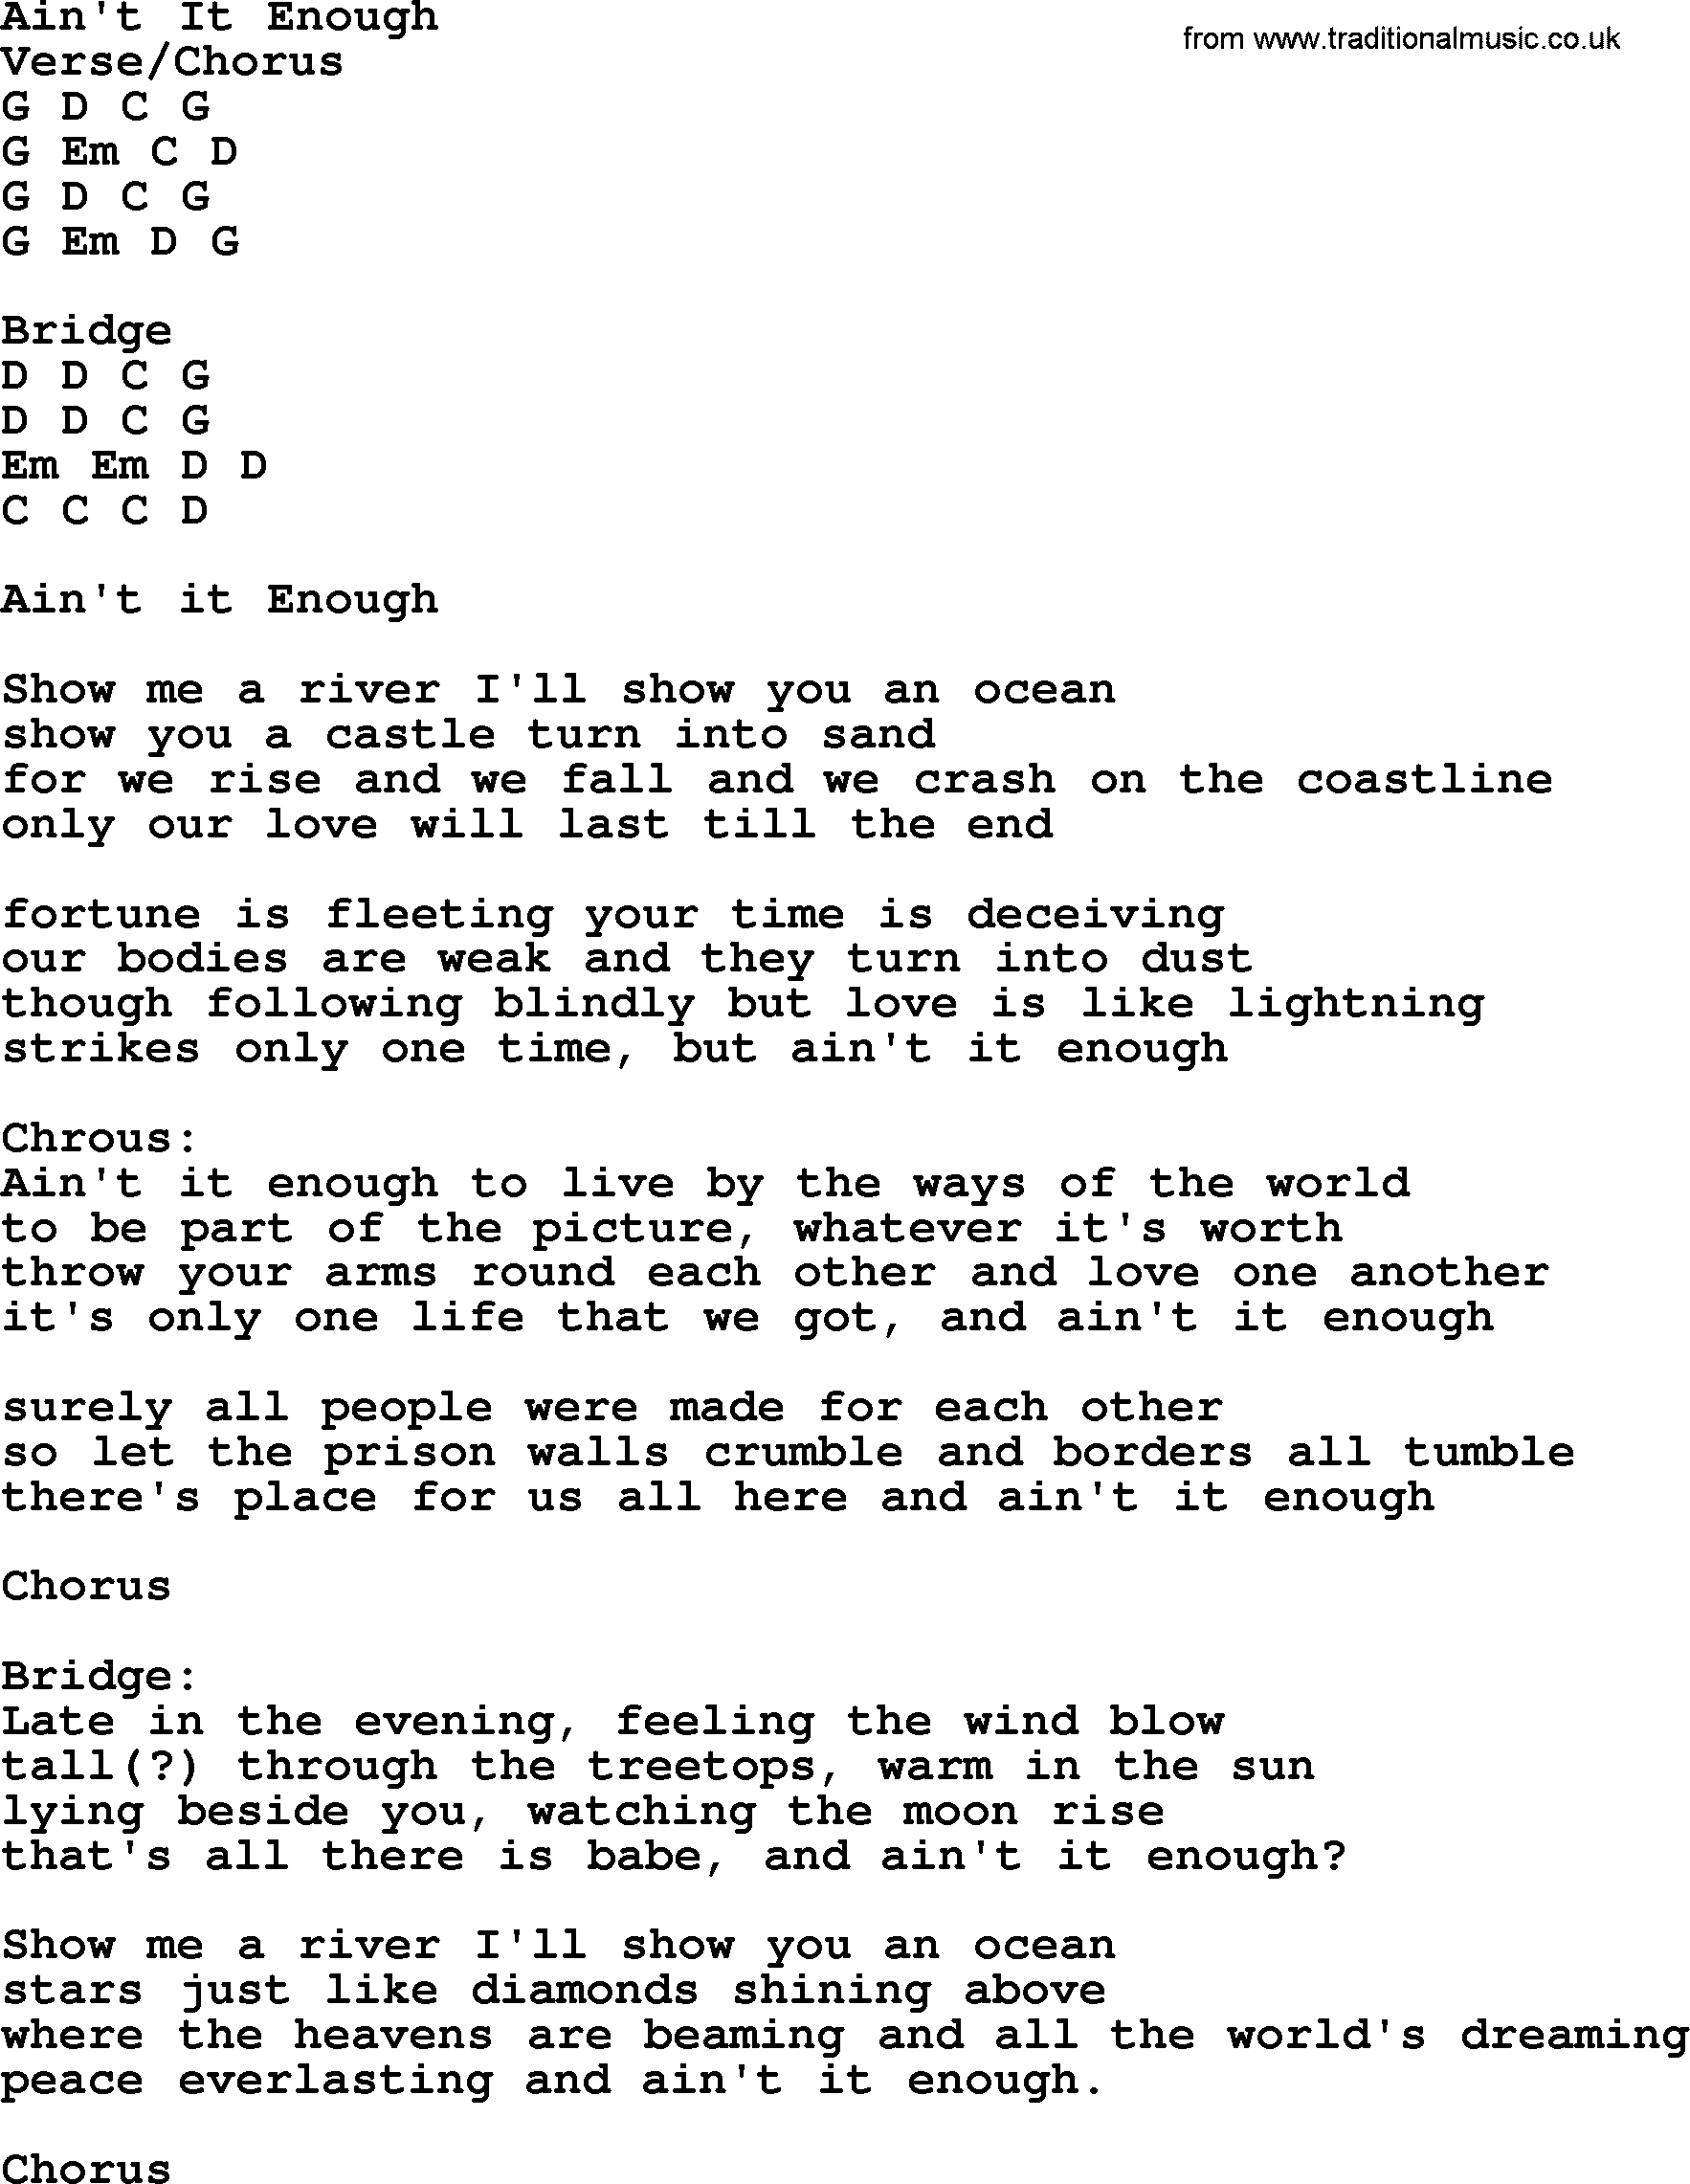 Bluegrass song: Ain't It Enough, lyrics and chords